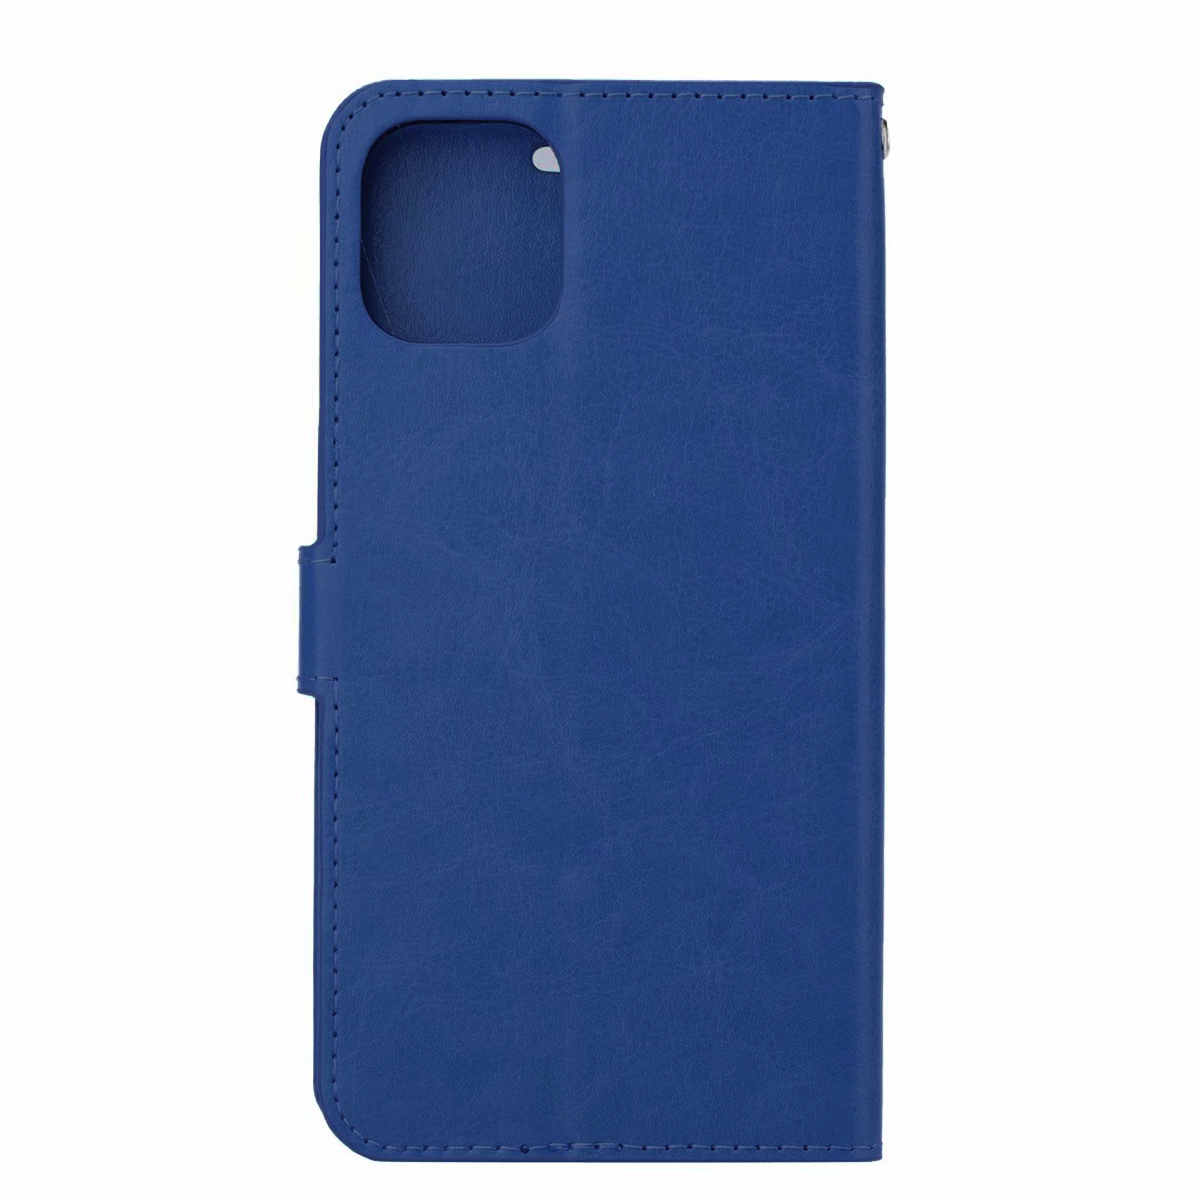 Nomfy Hoes voor iPhone 11 Pro Hoes Bookcase Flipcase Book Cover - Hoes voor iPhone 11 Pro Hoesje Book Case - Donker Blauw